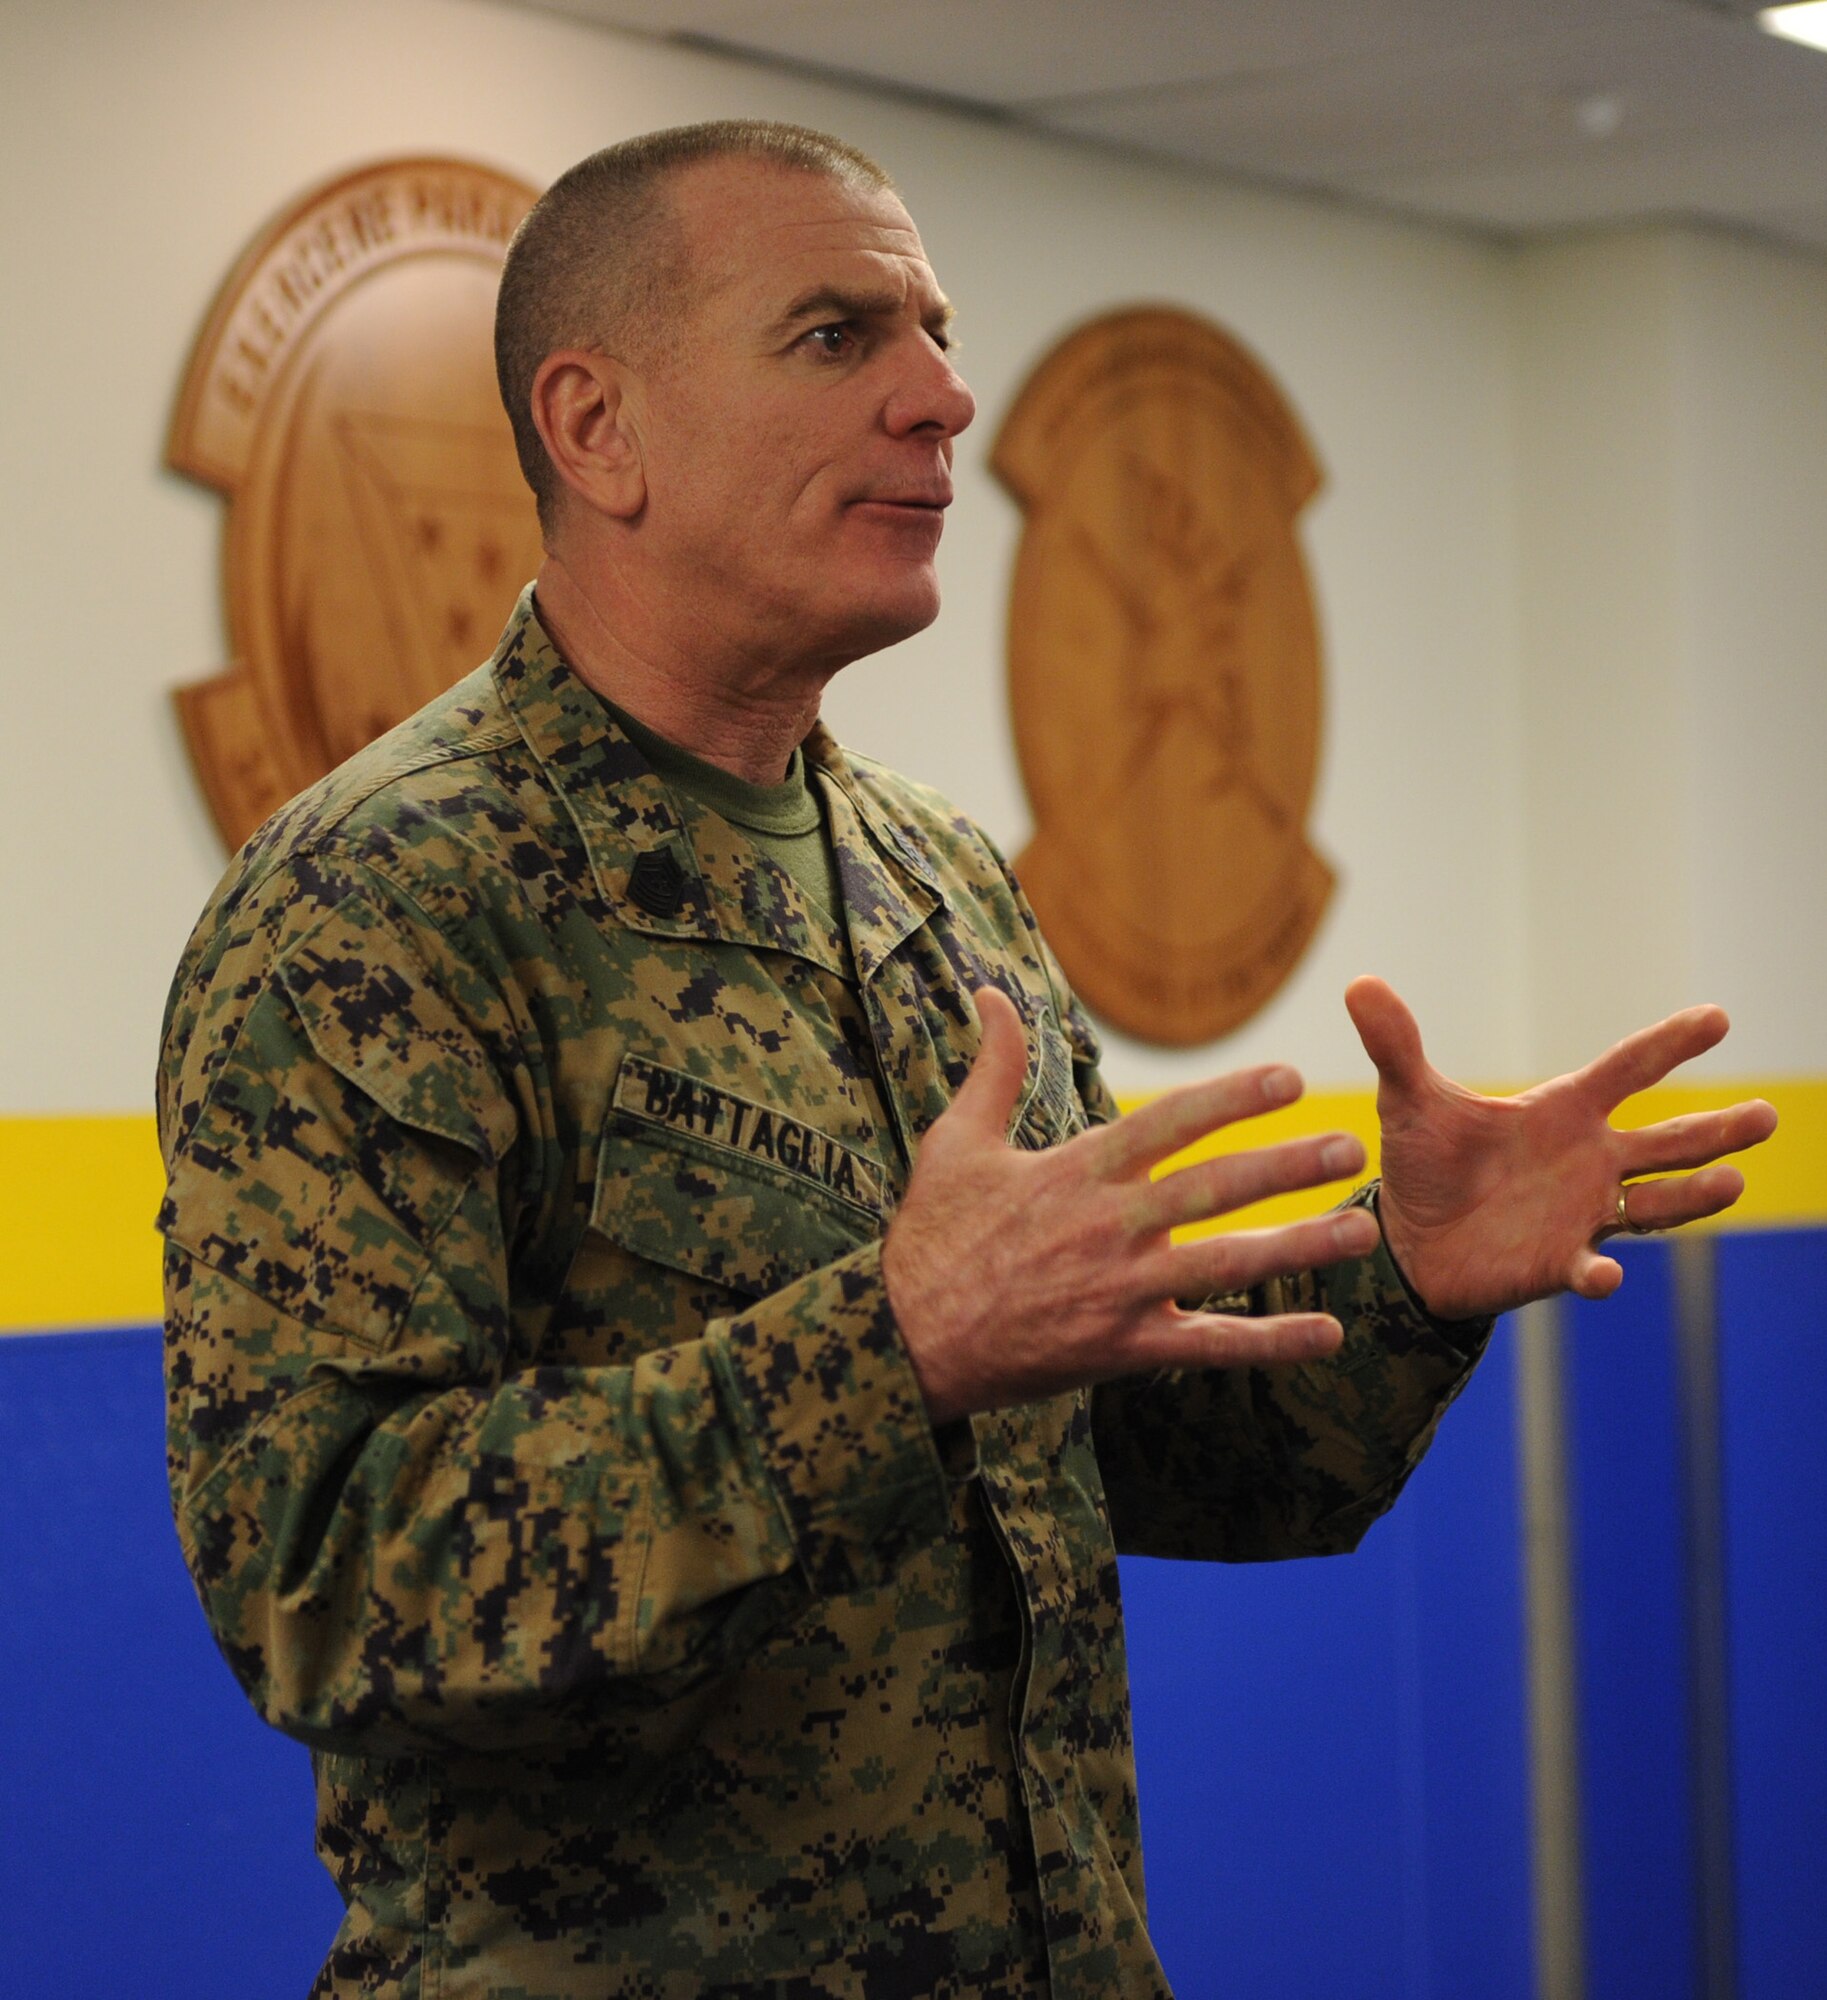 Marine Corps Sgt. Maj. Bryan B. Battaglia, the senior enlisted advisor to the chairman of the Joint Chiefs of Staff, talks to 341st Security Forces Squadron members during Guardmount Jan. 16. Battaglia visited Malmstrom Air Force Base Jan. 15 to 18 to meet with enlisted Airmen and their families, and Great Falls community members. (U.S. Air force photo/Senior Airman Katrina Heikkinen)